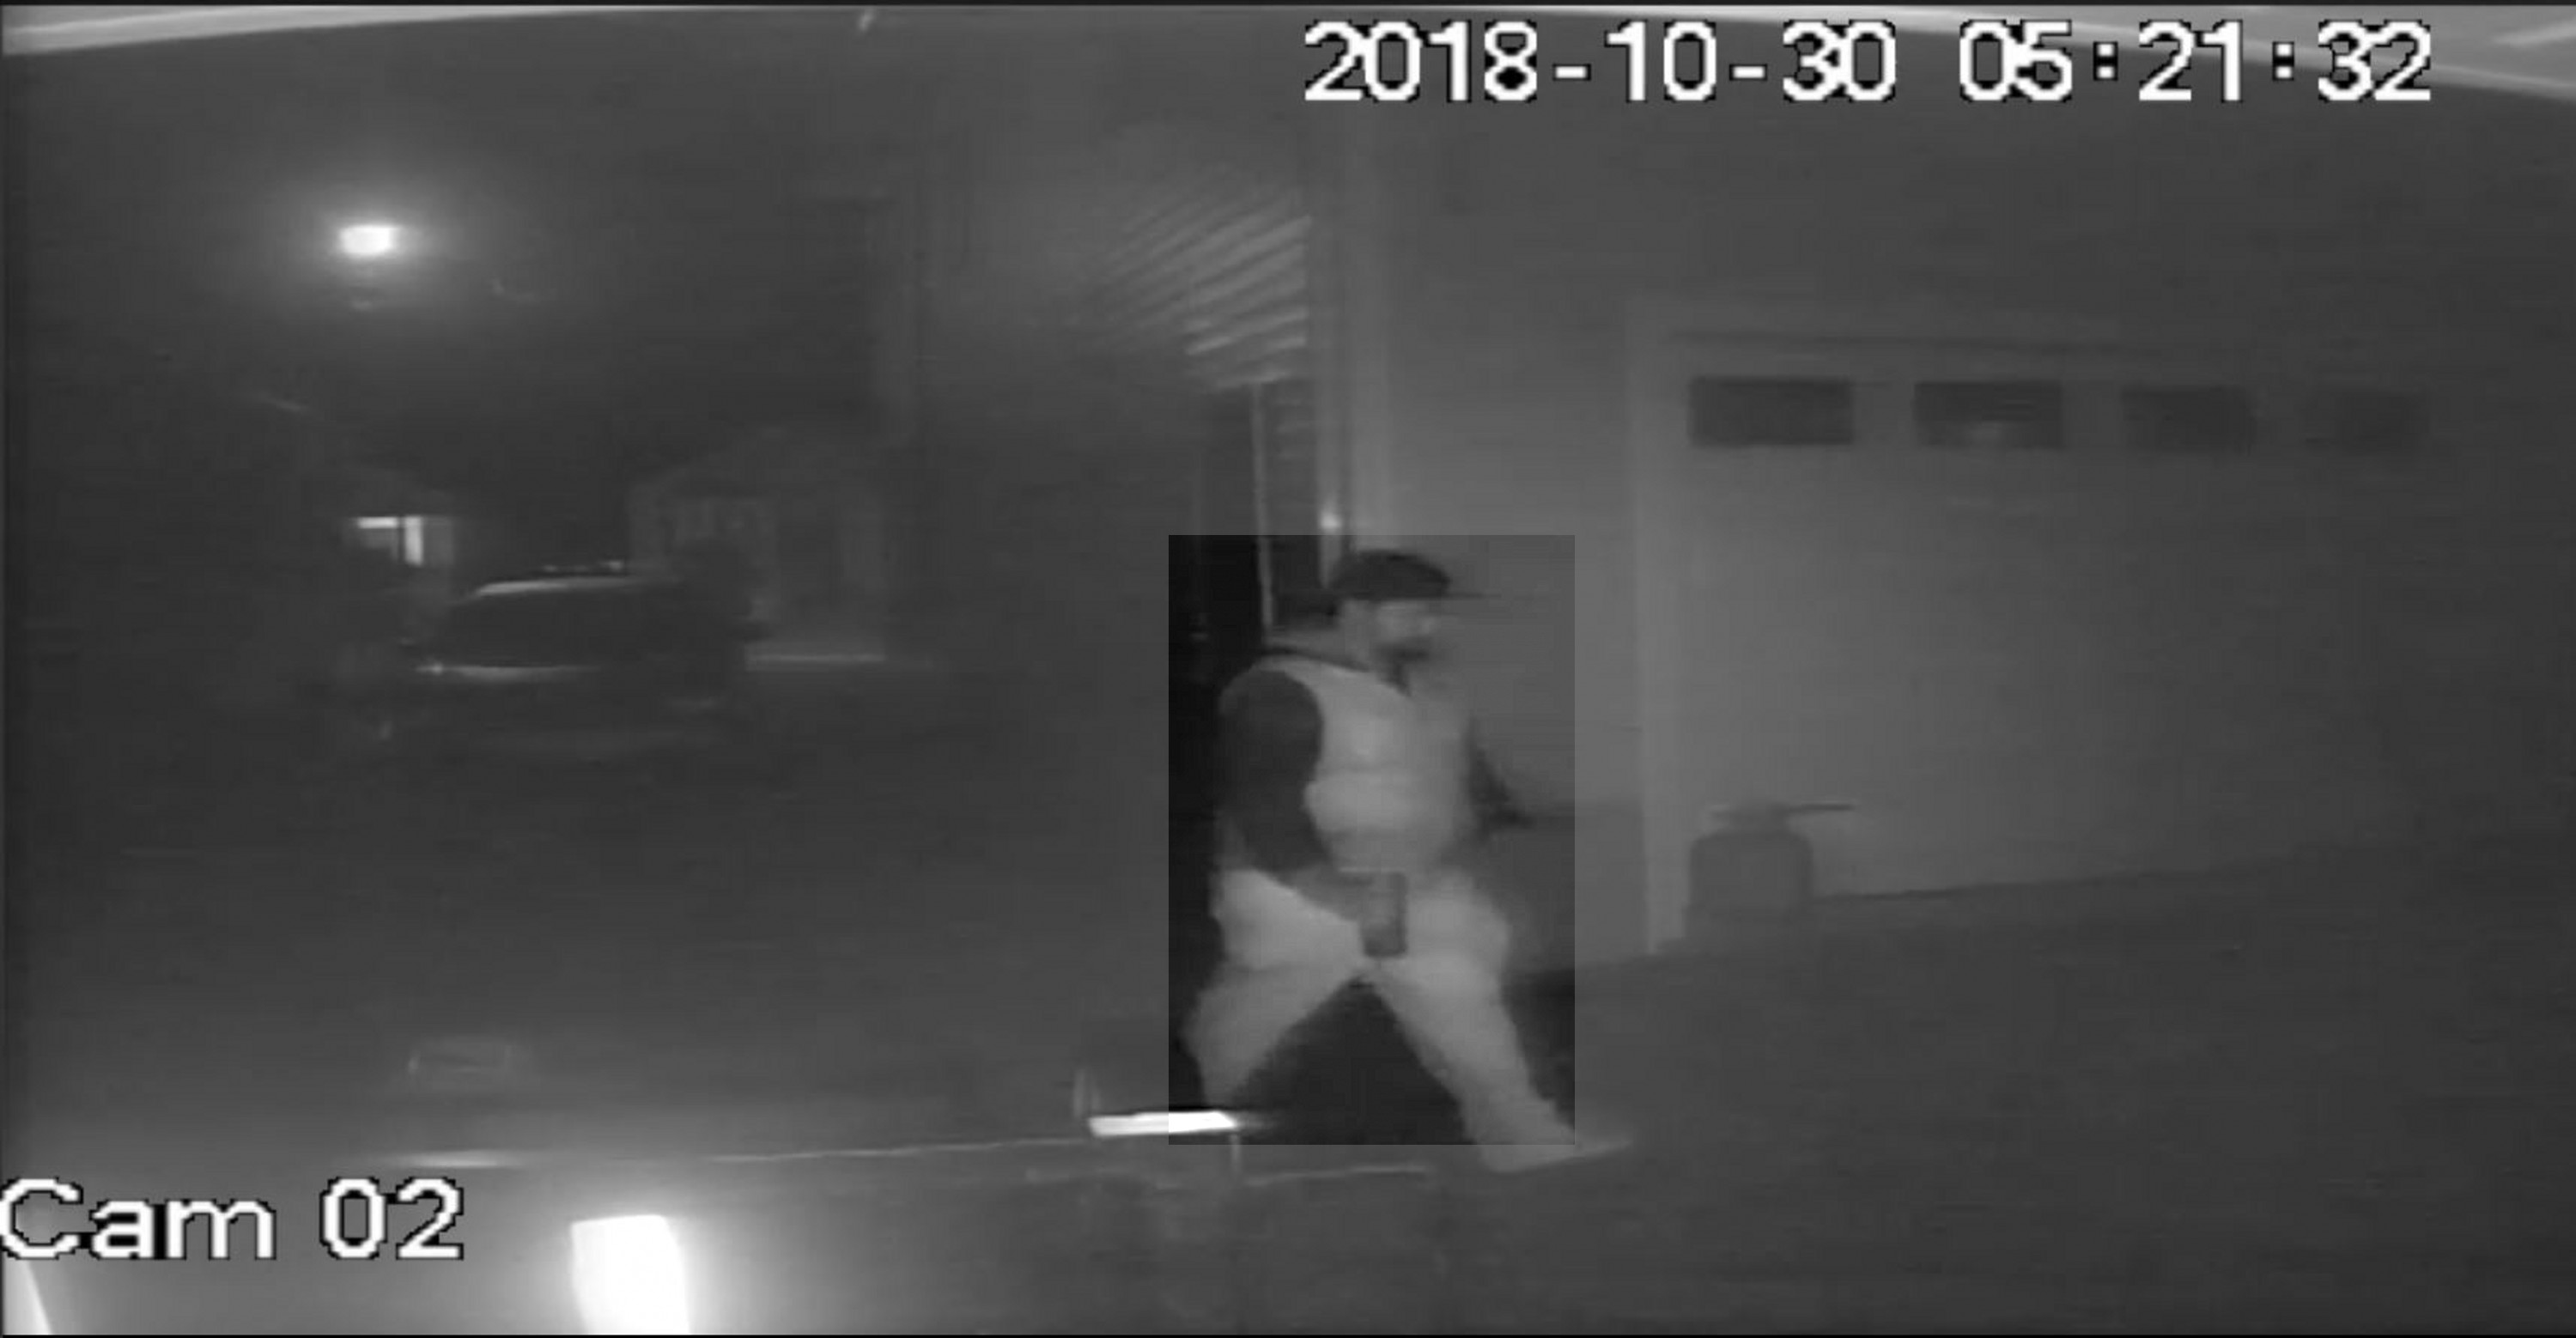 A person of interest in an Oct. 30, 2018 fire in Seaside Heights. (Photo: OCPO)